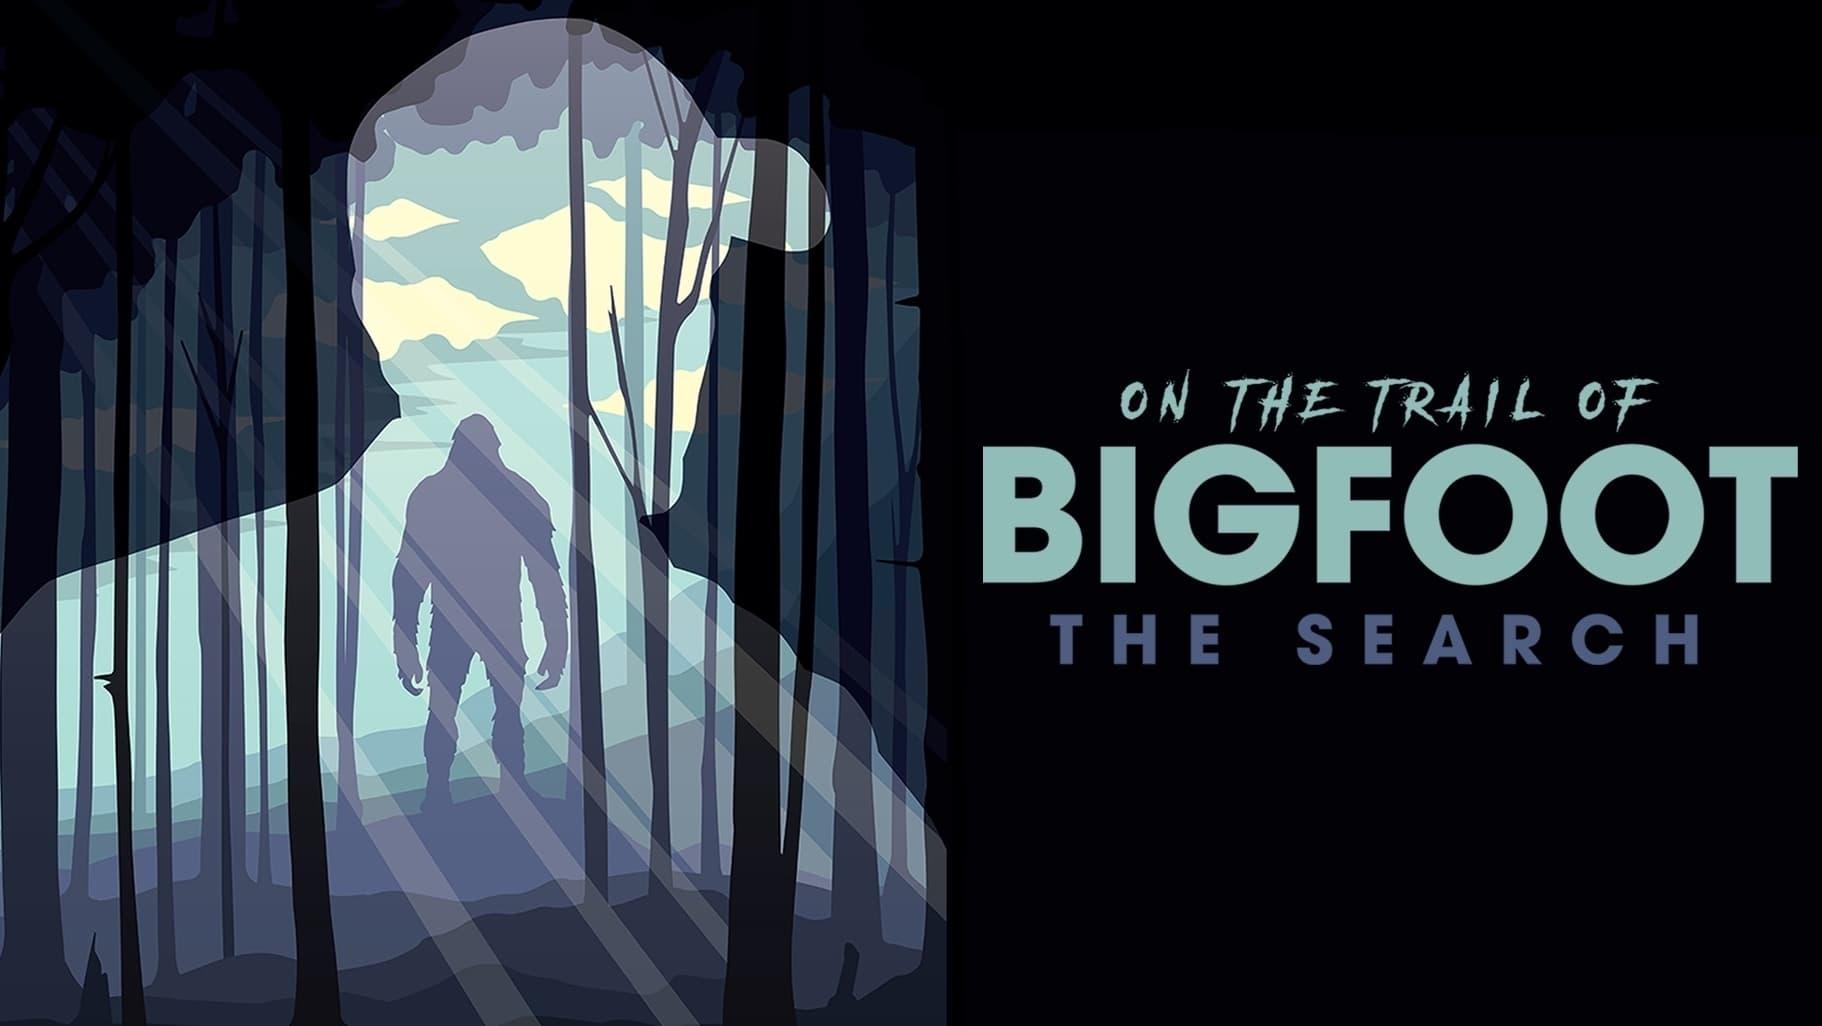 On the Trail of Bigfoot: The Search backdrop